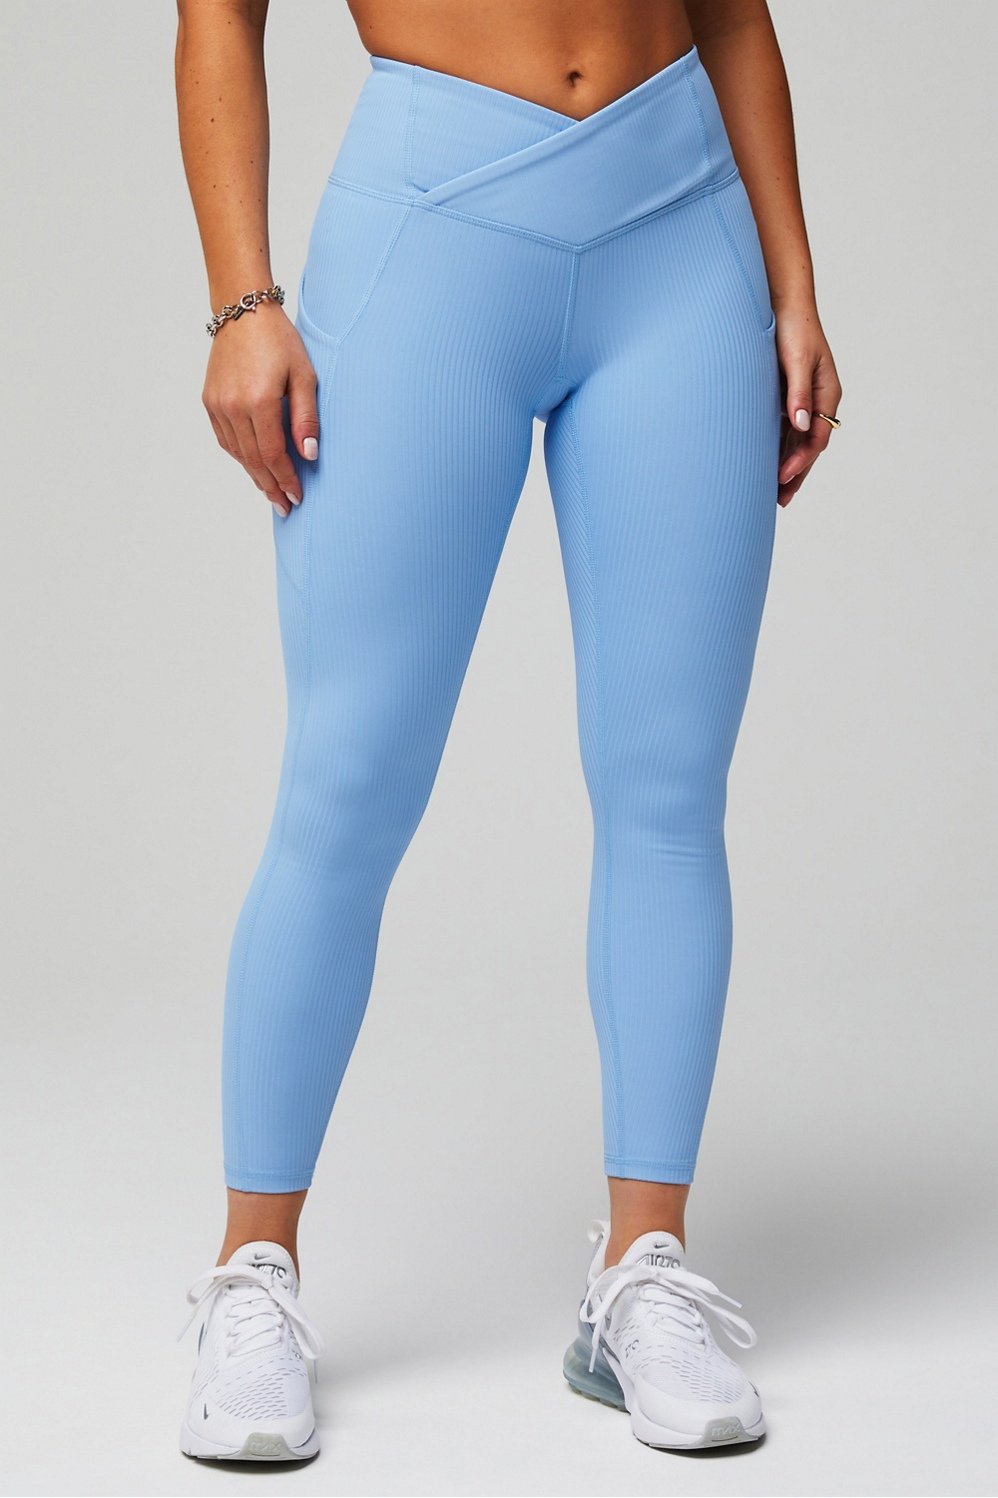 Fabletics Leggings & normani skirt cutout crop top wrap heels sandals pool  – Fonjep News, Kate Hudson Works Out in Sports Bra, fendi canvas lace up  boots